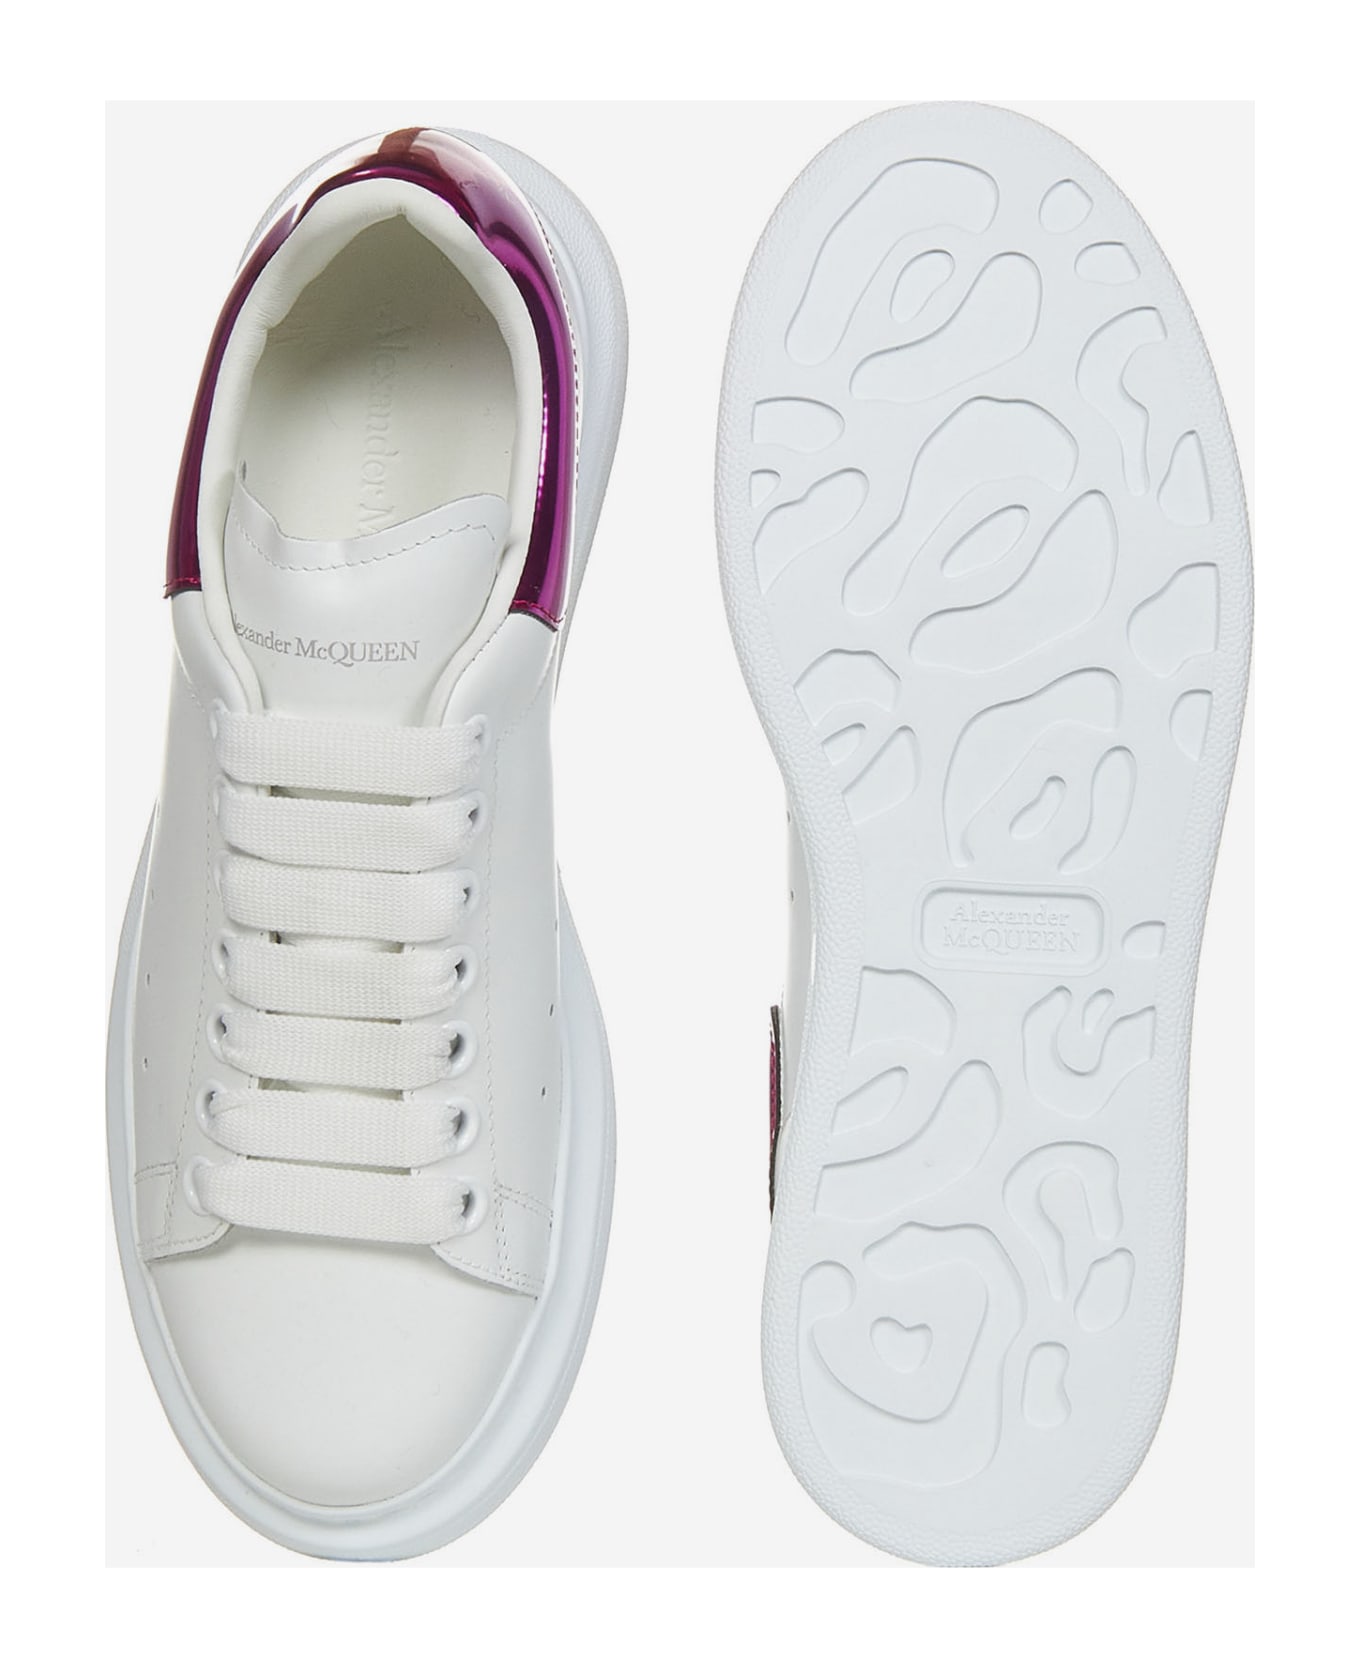 Alexander McQueen White Sneakers With Platform And Metallic Fuchsia Heel Tab In Leather Woman Alexander Mcqueen - White